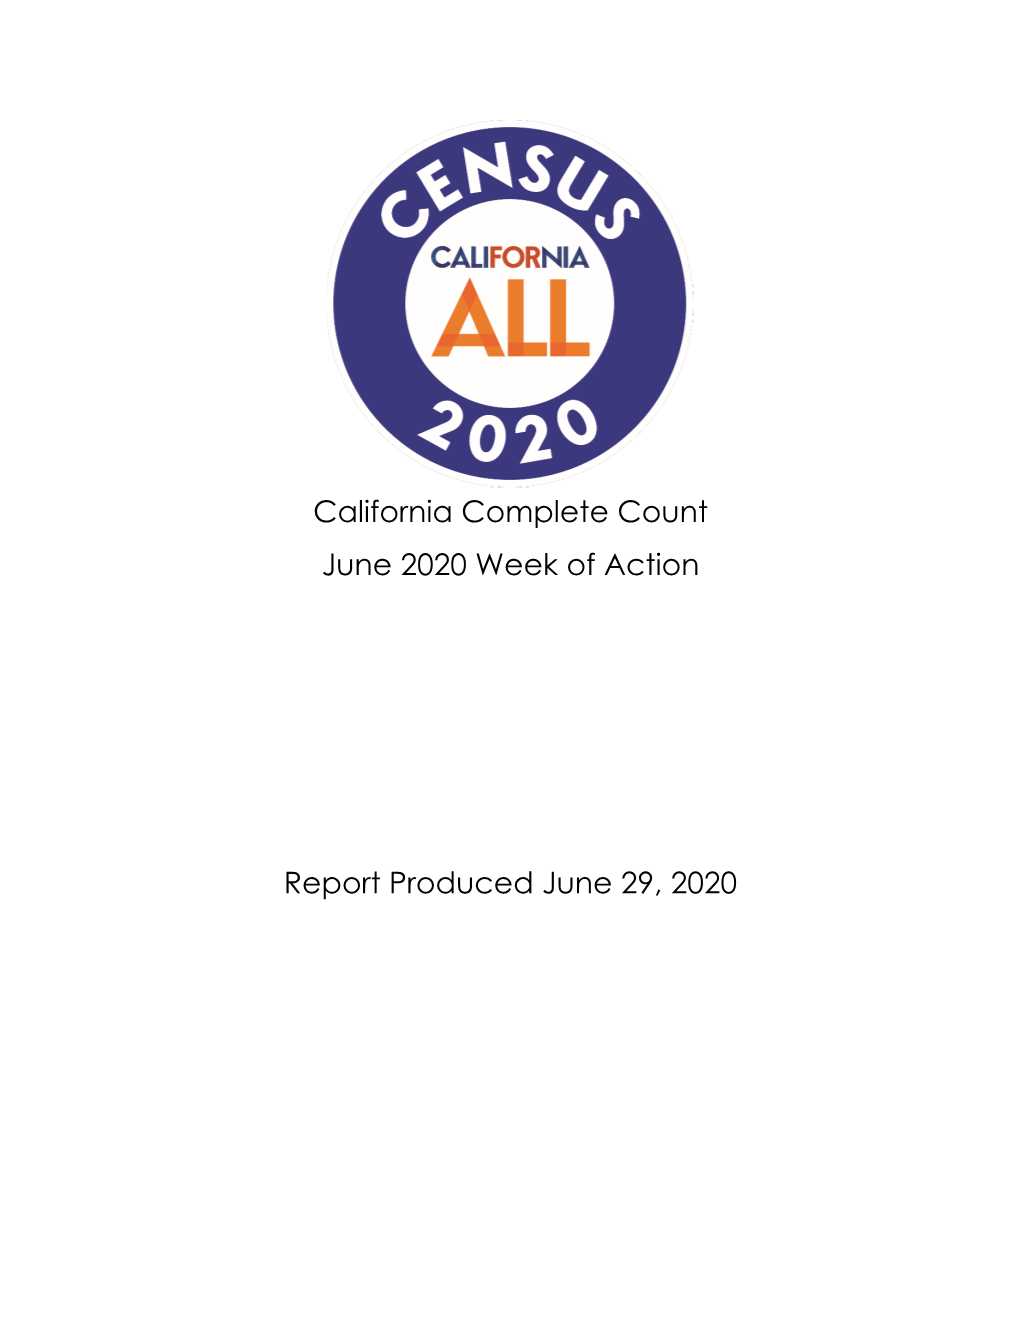 California Complete Count June 2020 Week of Action Report Produced